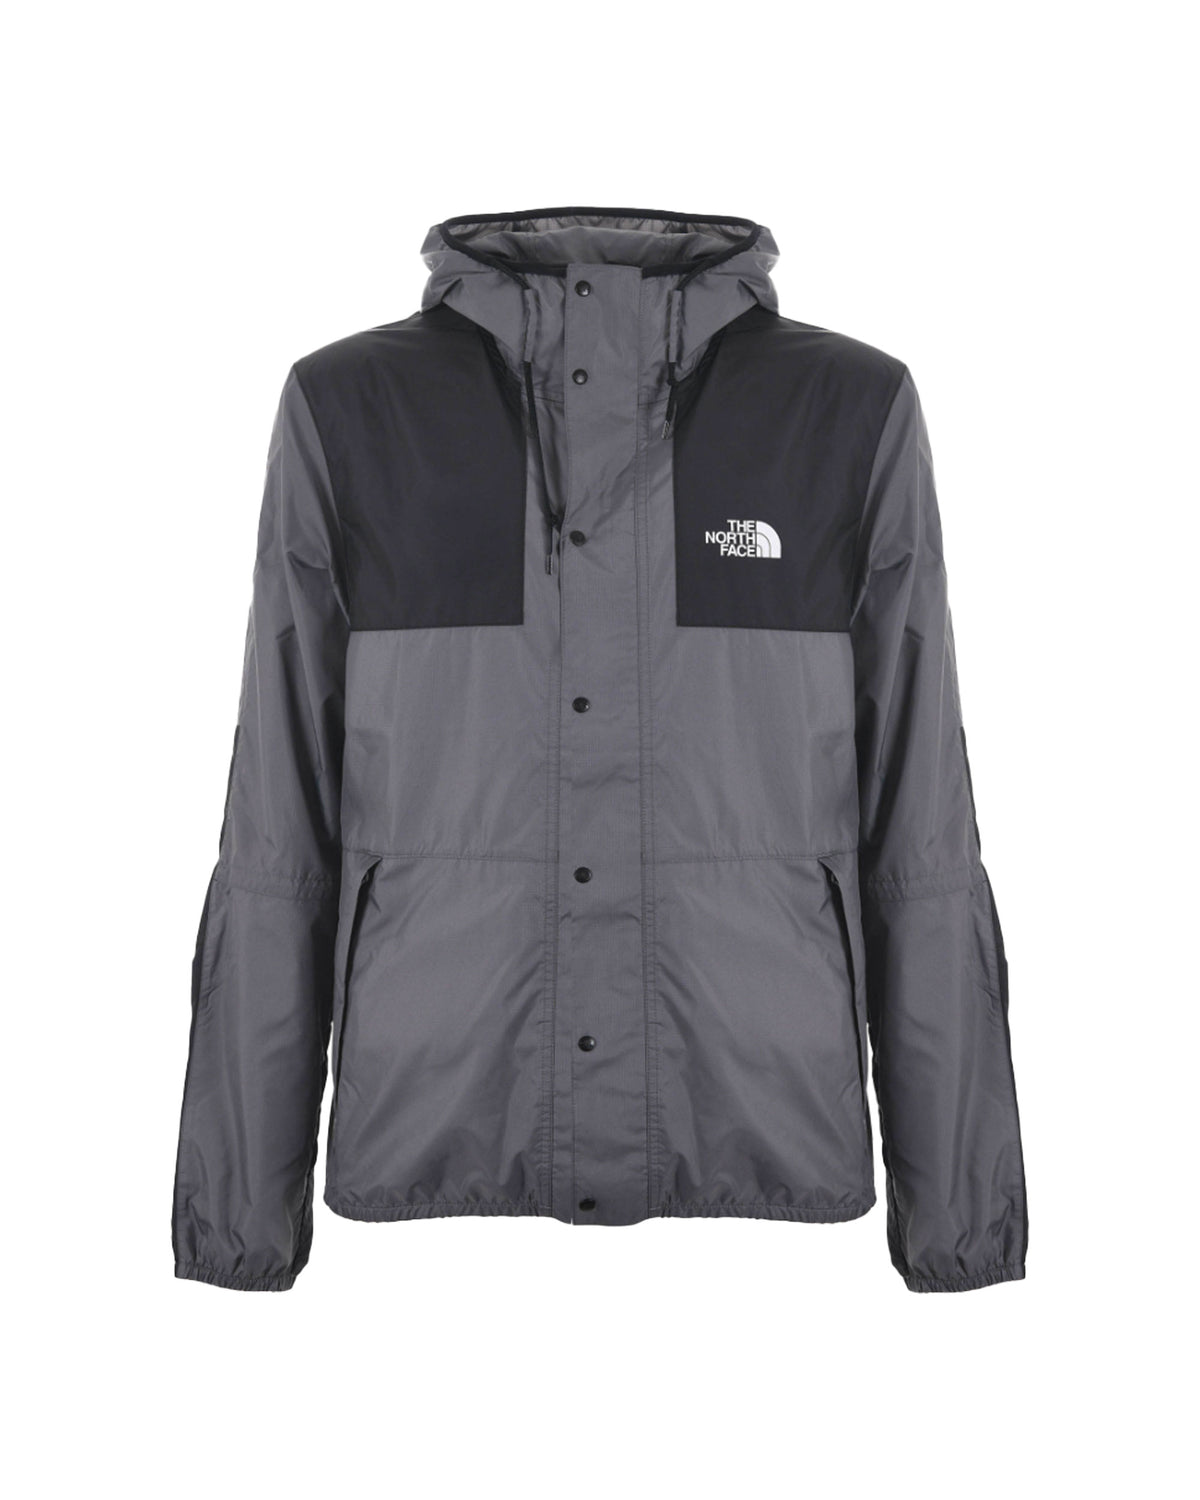 Giacca Uomo The North Face Mountain Jacket Smoked Pearl